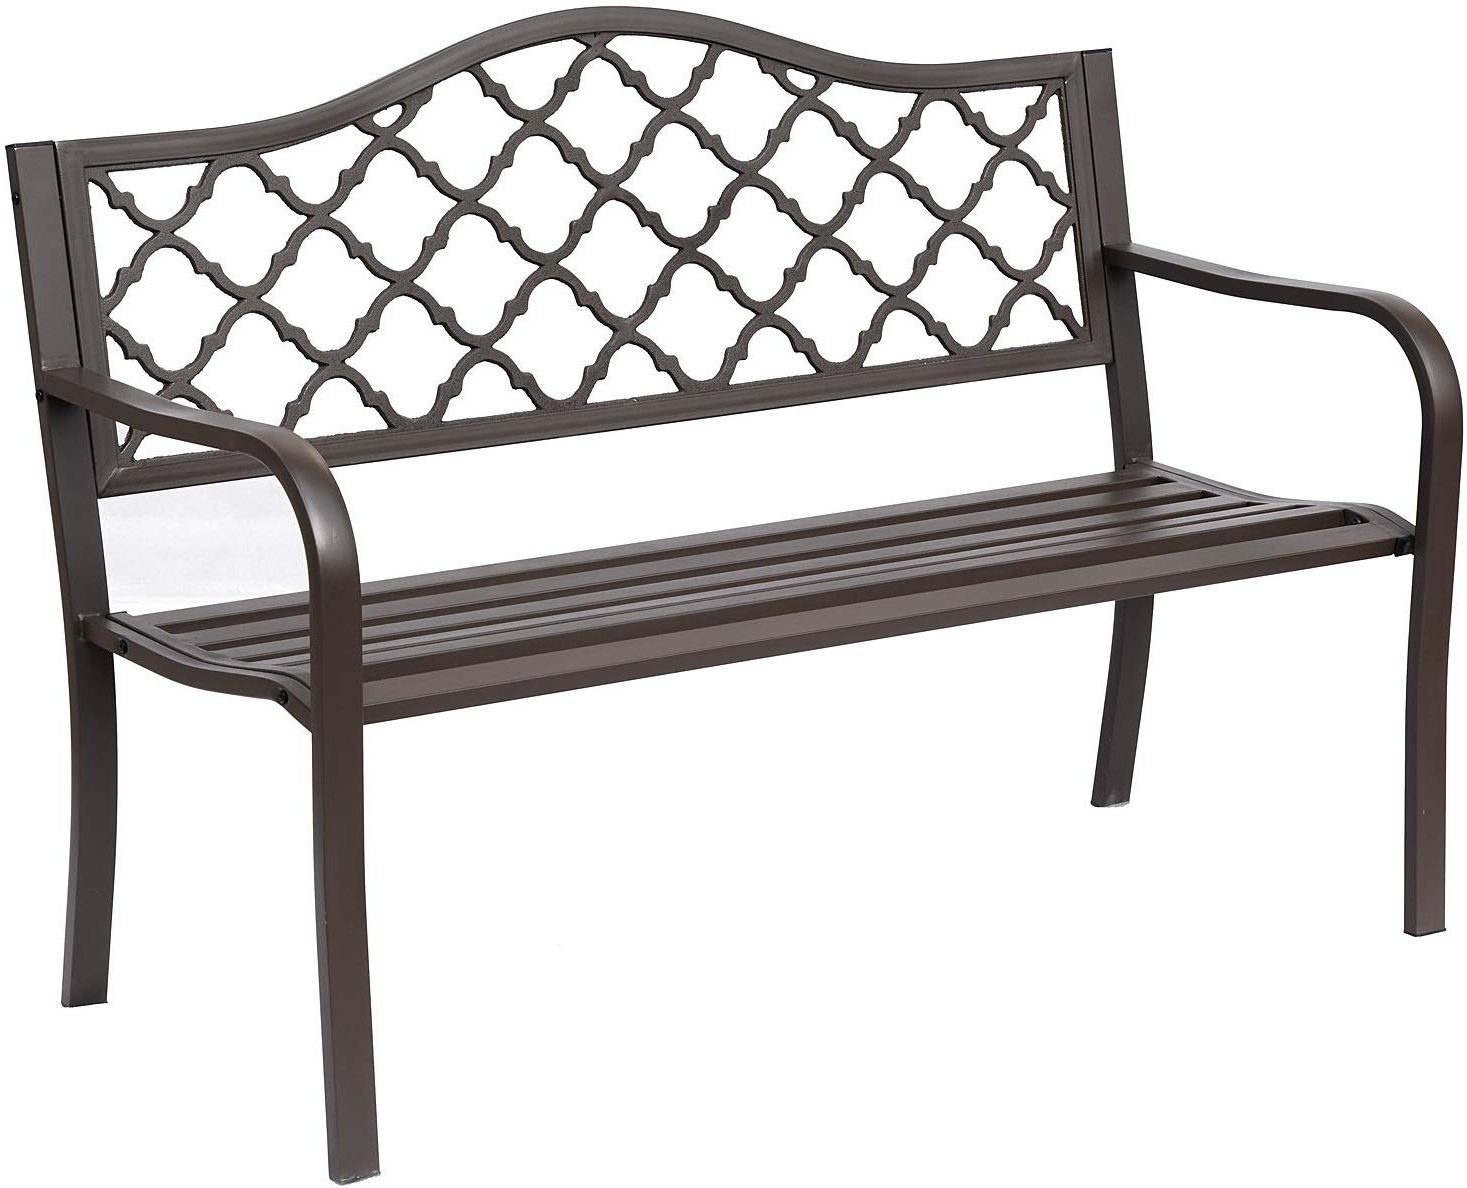 1 Person Antique Black Iron Outdoor Swings With Regard To Favorite Outsunny Antique Style Cast Iron Outdoor Front Porch Bench (View 25 of 30)